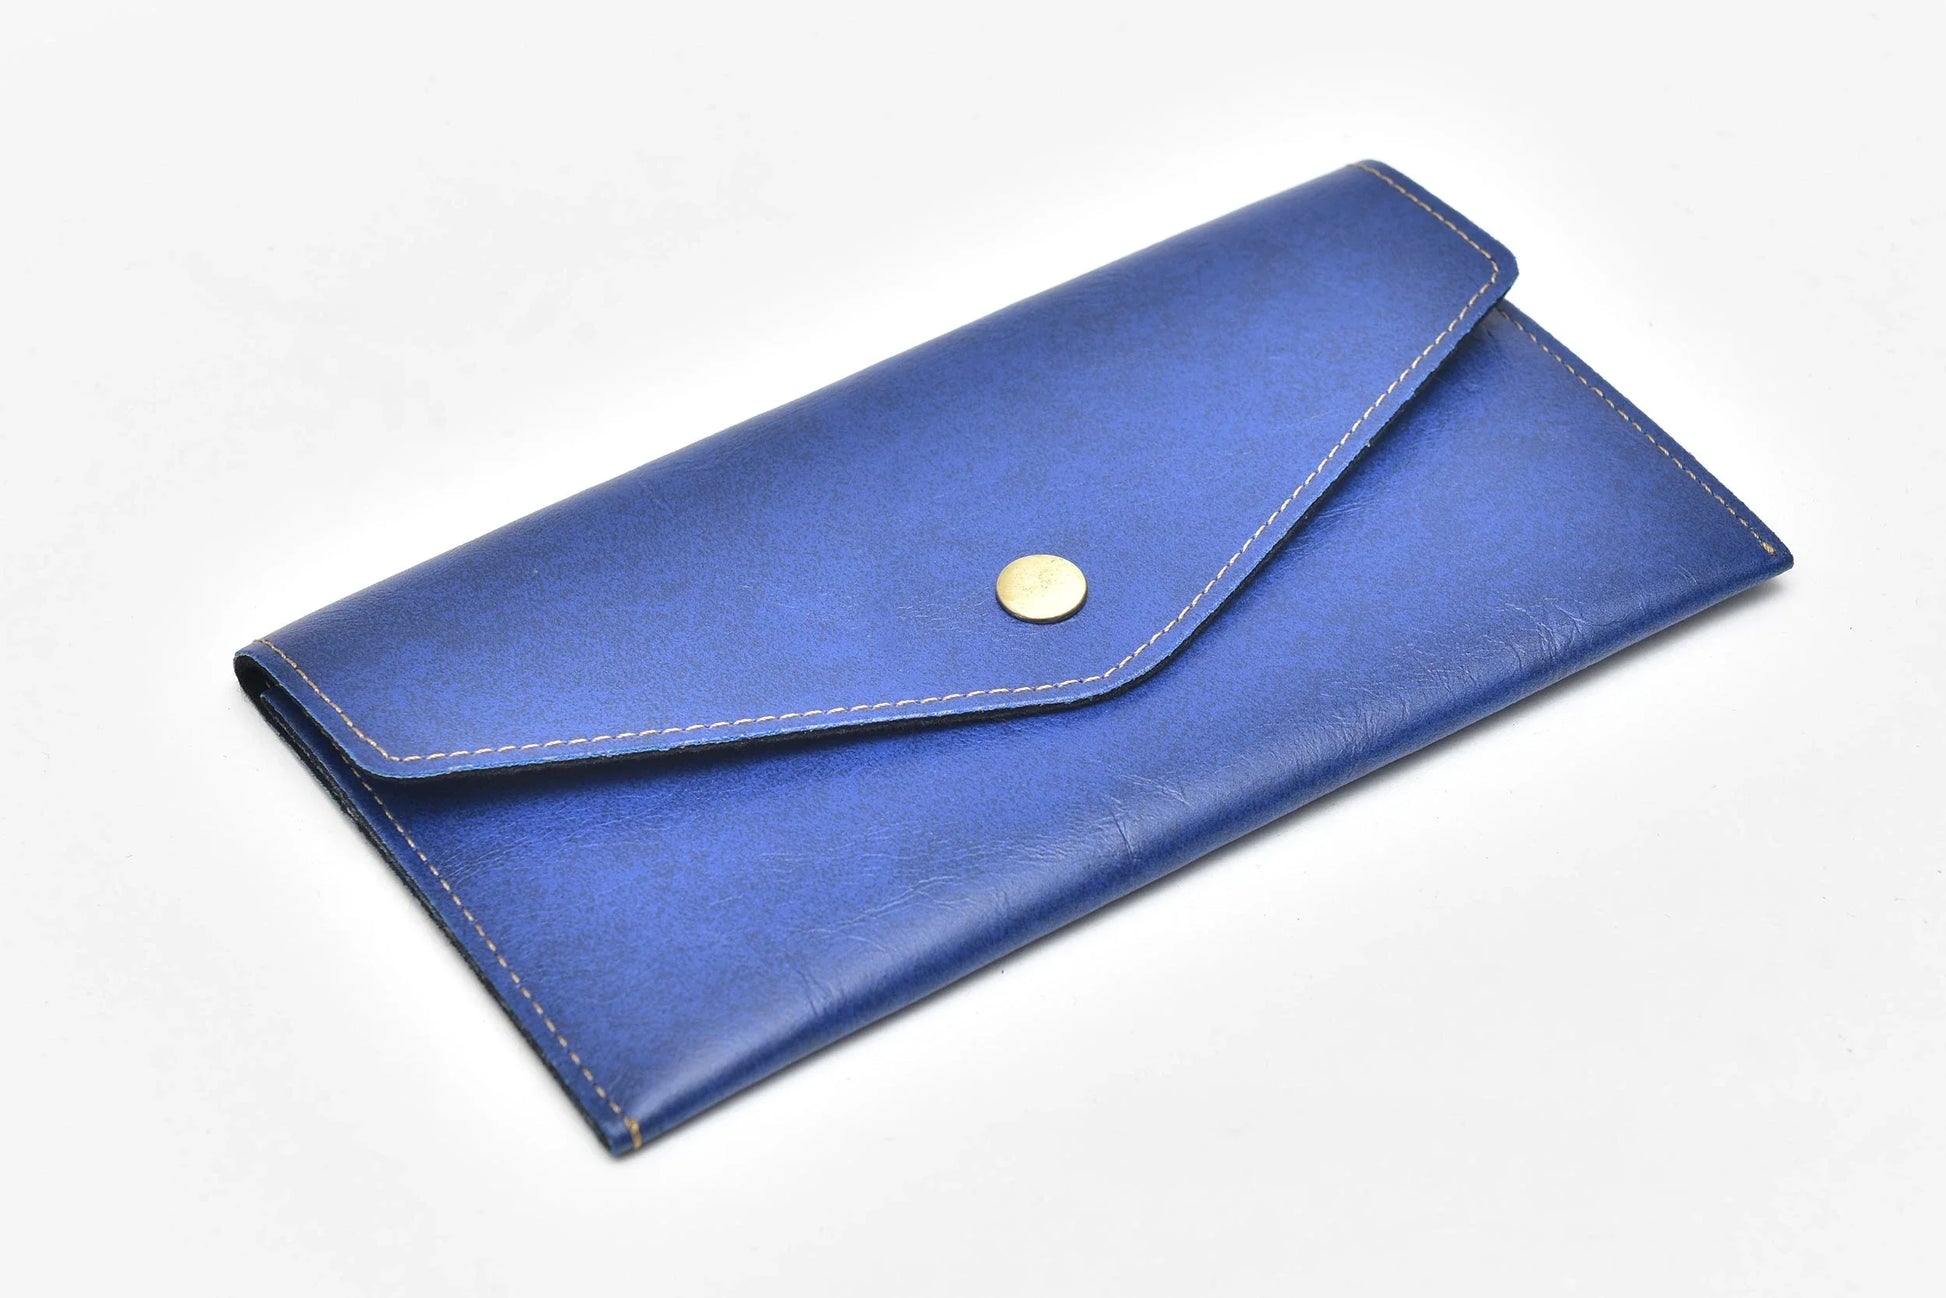 With its sleek and sophisticated design, this personalized leather clutch is a must-have for any fashion-forward woman. Personalize it with your name or initials for an extra touch of luxury.